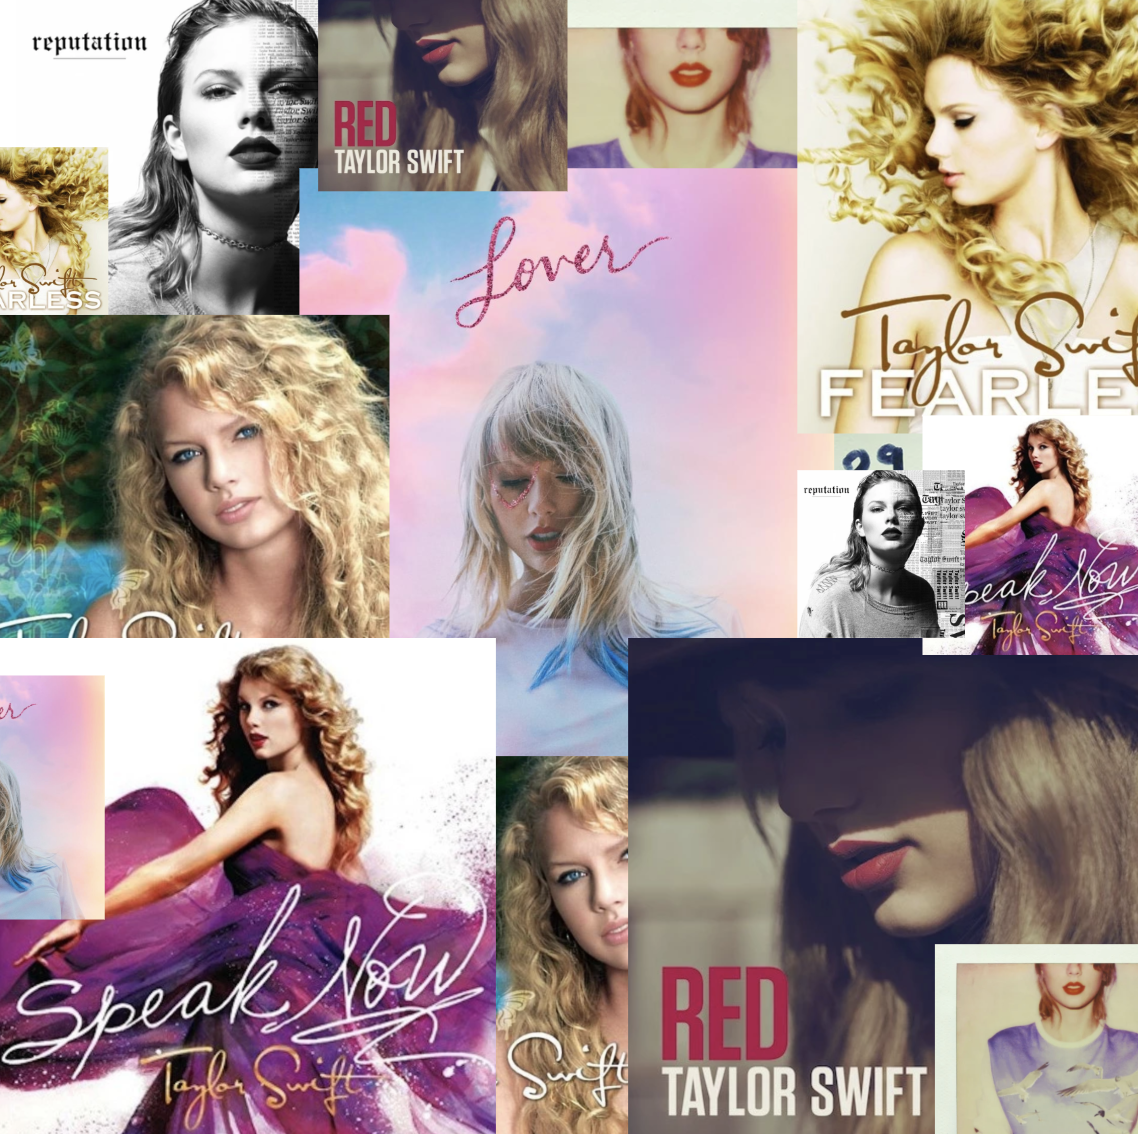 Taylor Swift album covers.